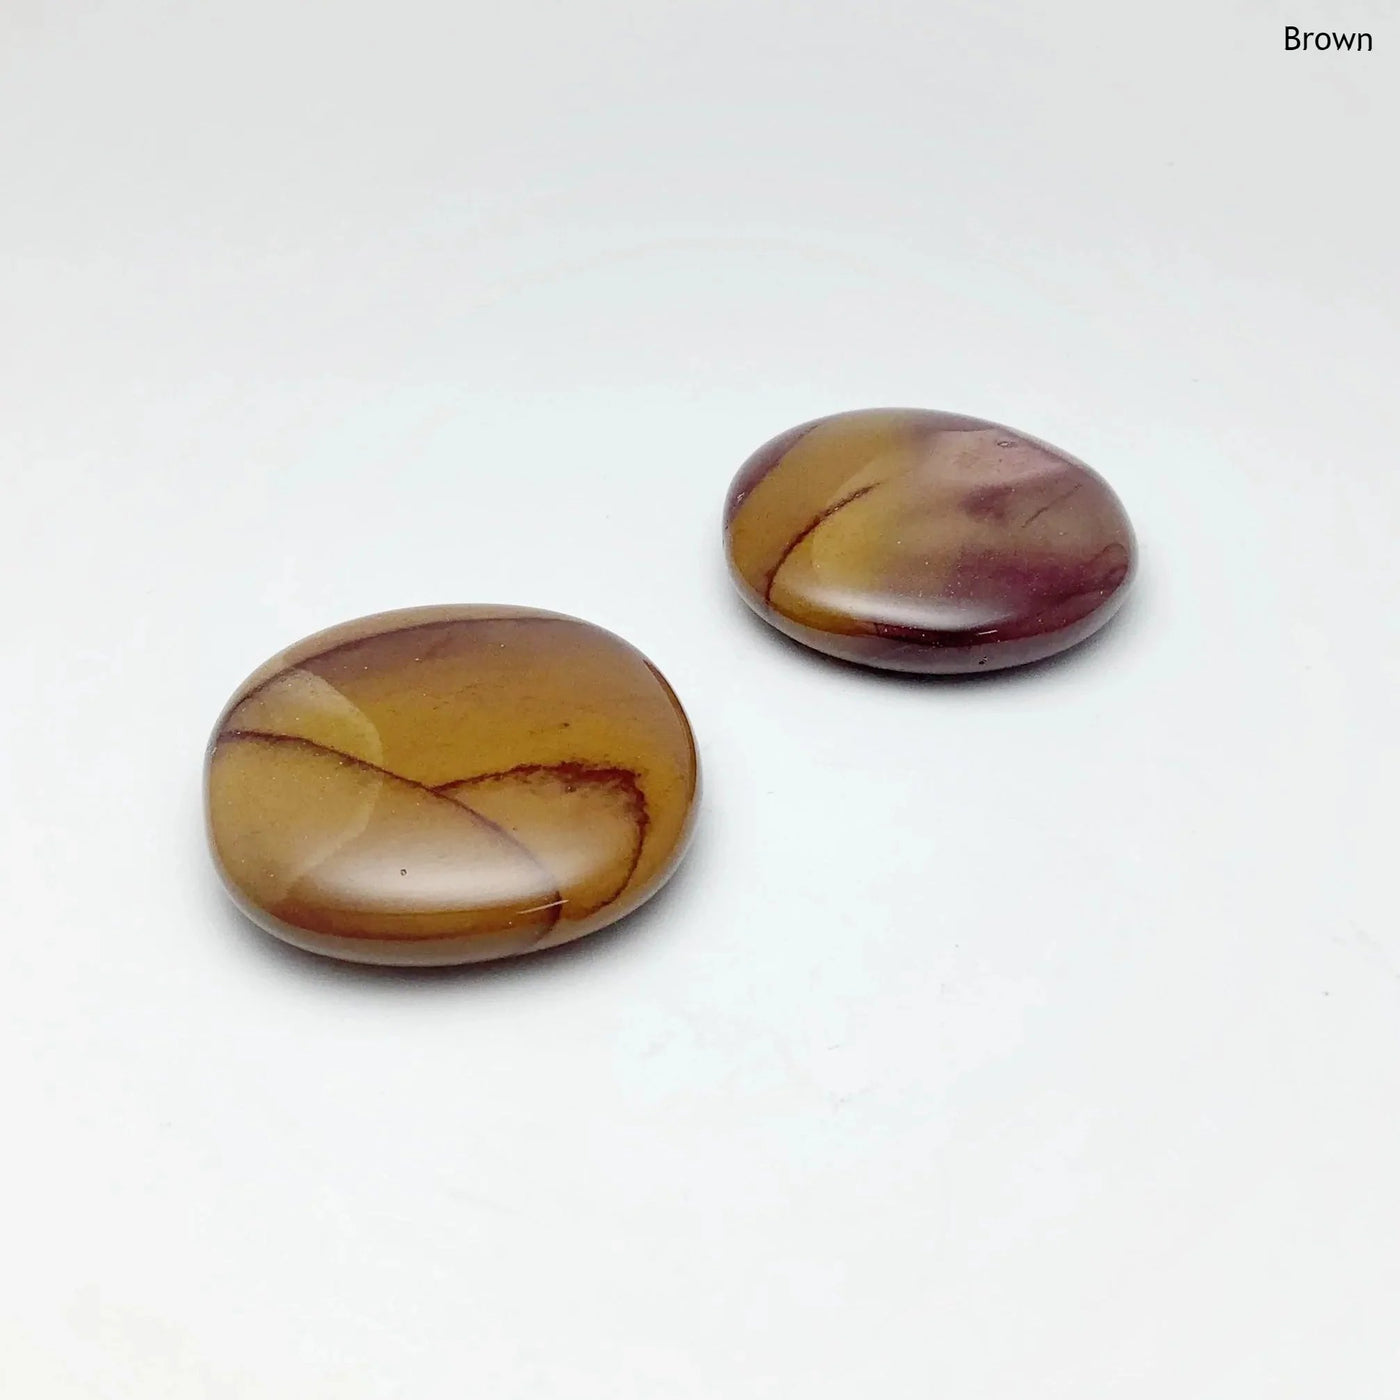 Mookaite Touch Stone at $29 Each